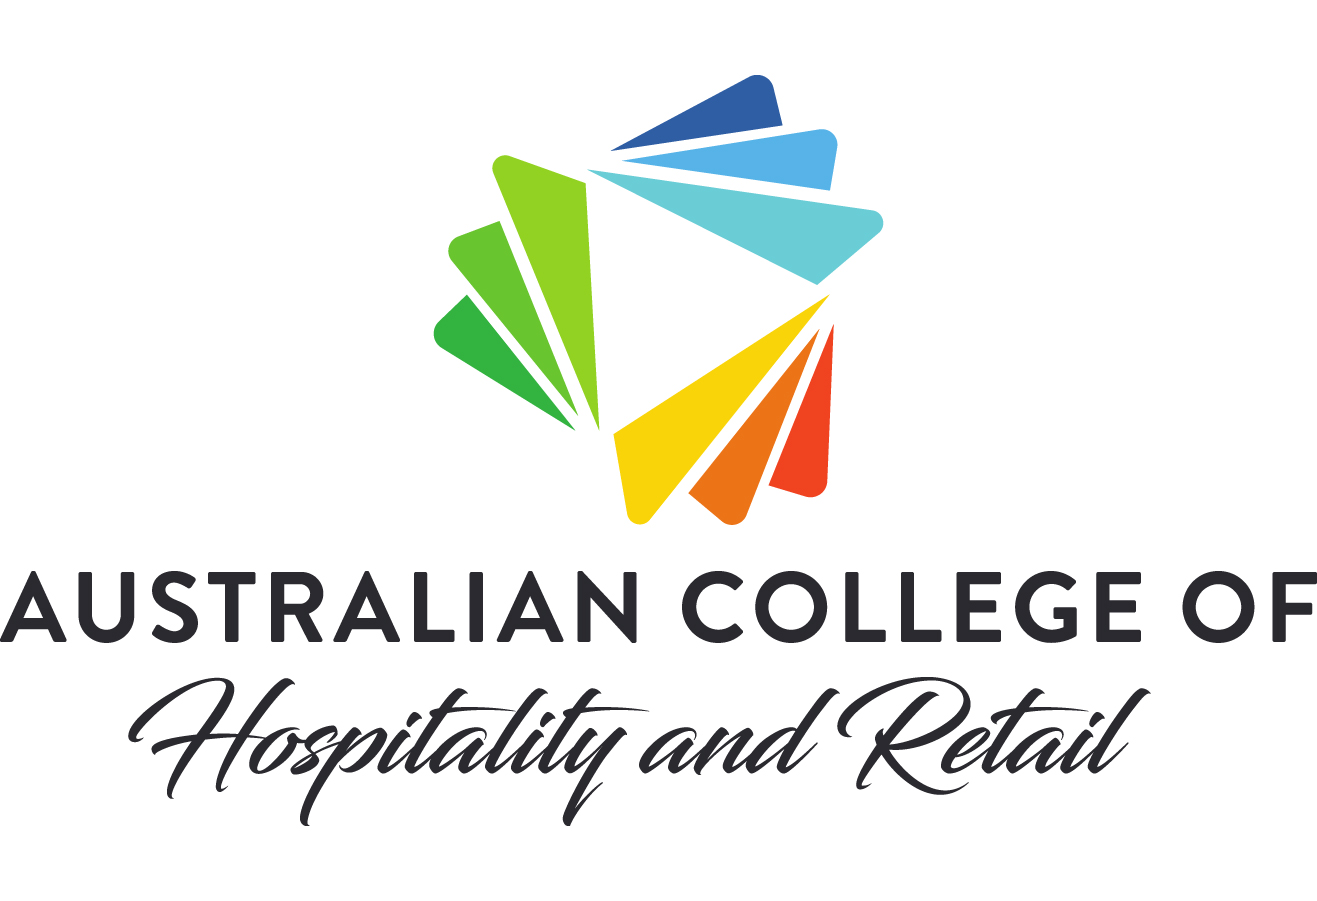 Australian College of Hospitality and Retail